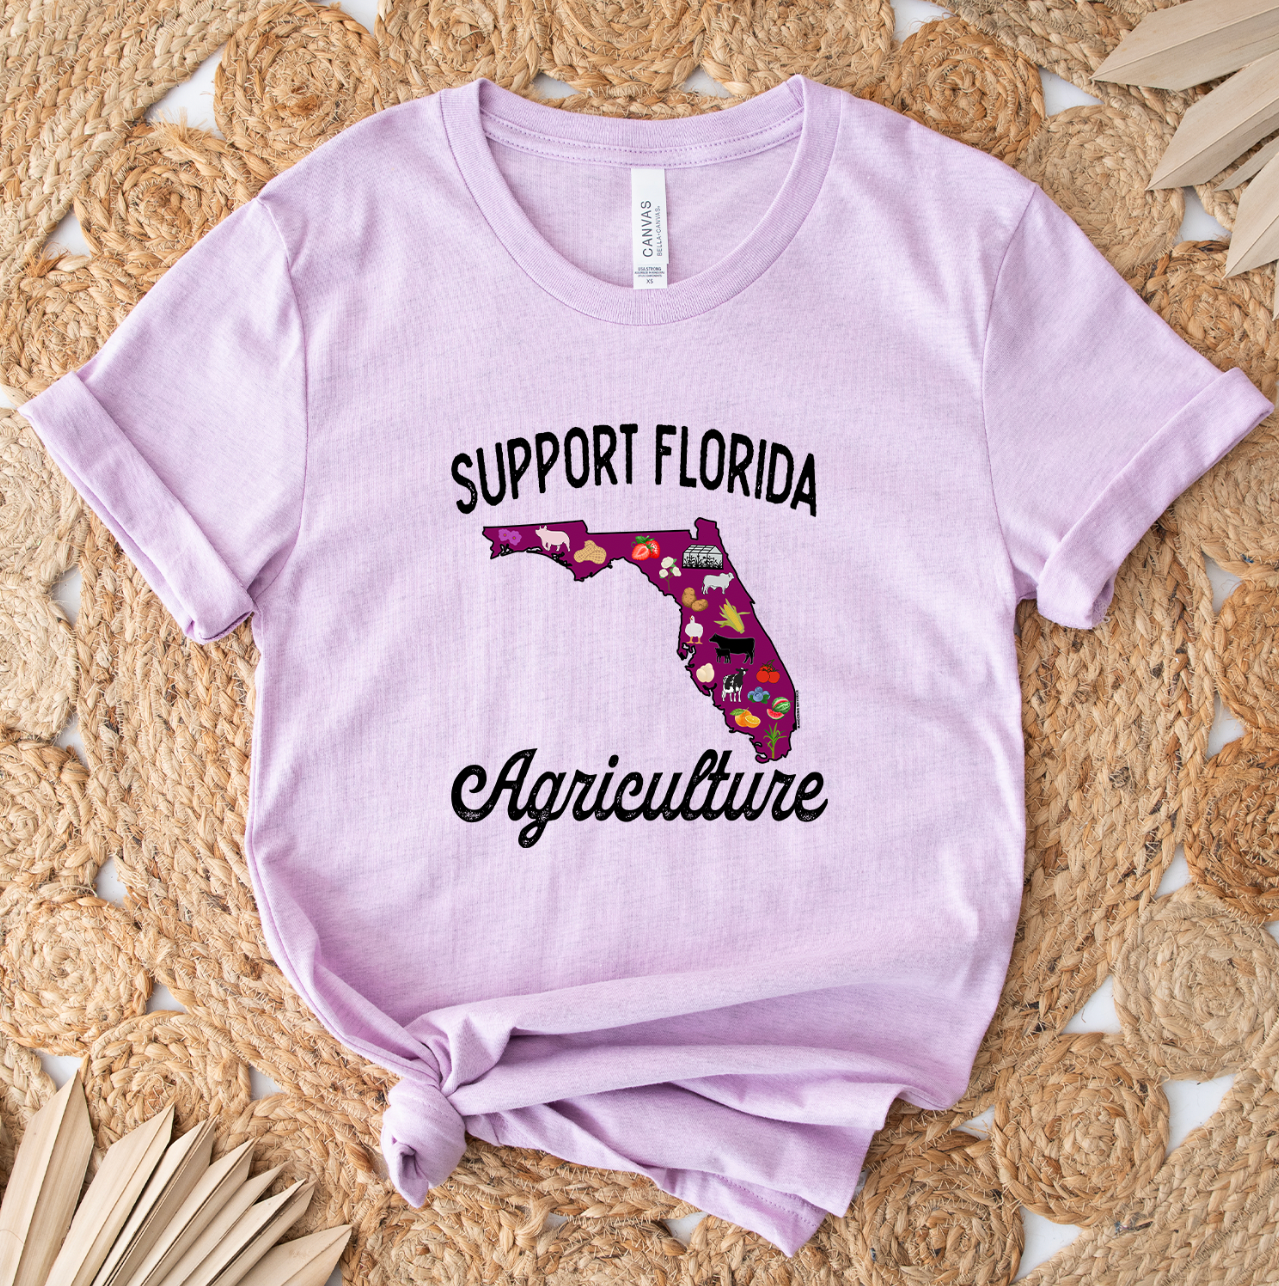 Support Florida Agriculture T-Shirt (XS-4XL) - Multiple Colors!